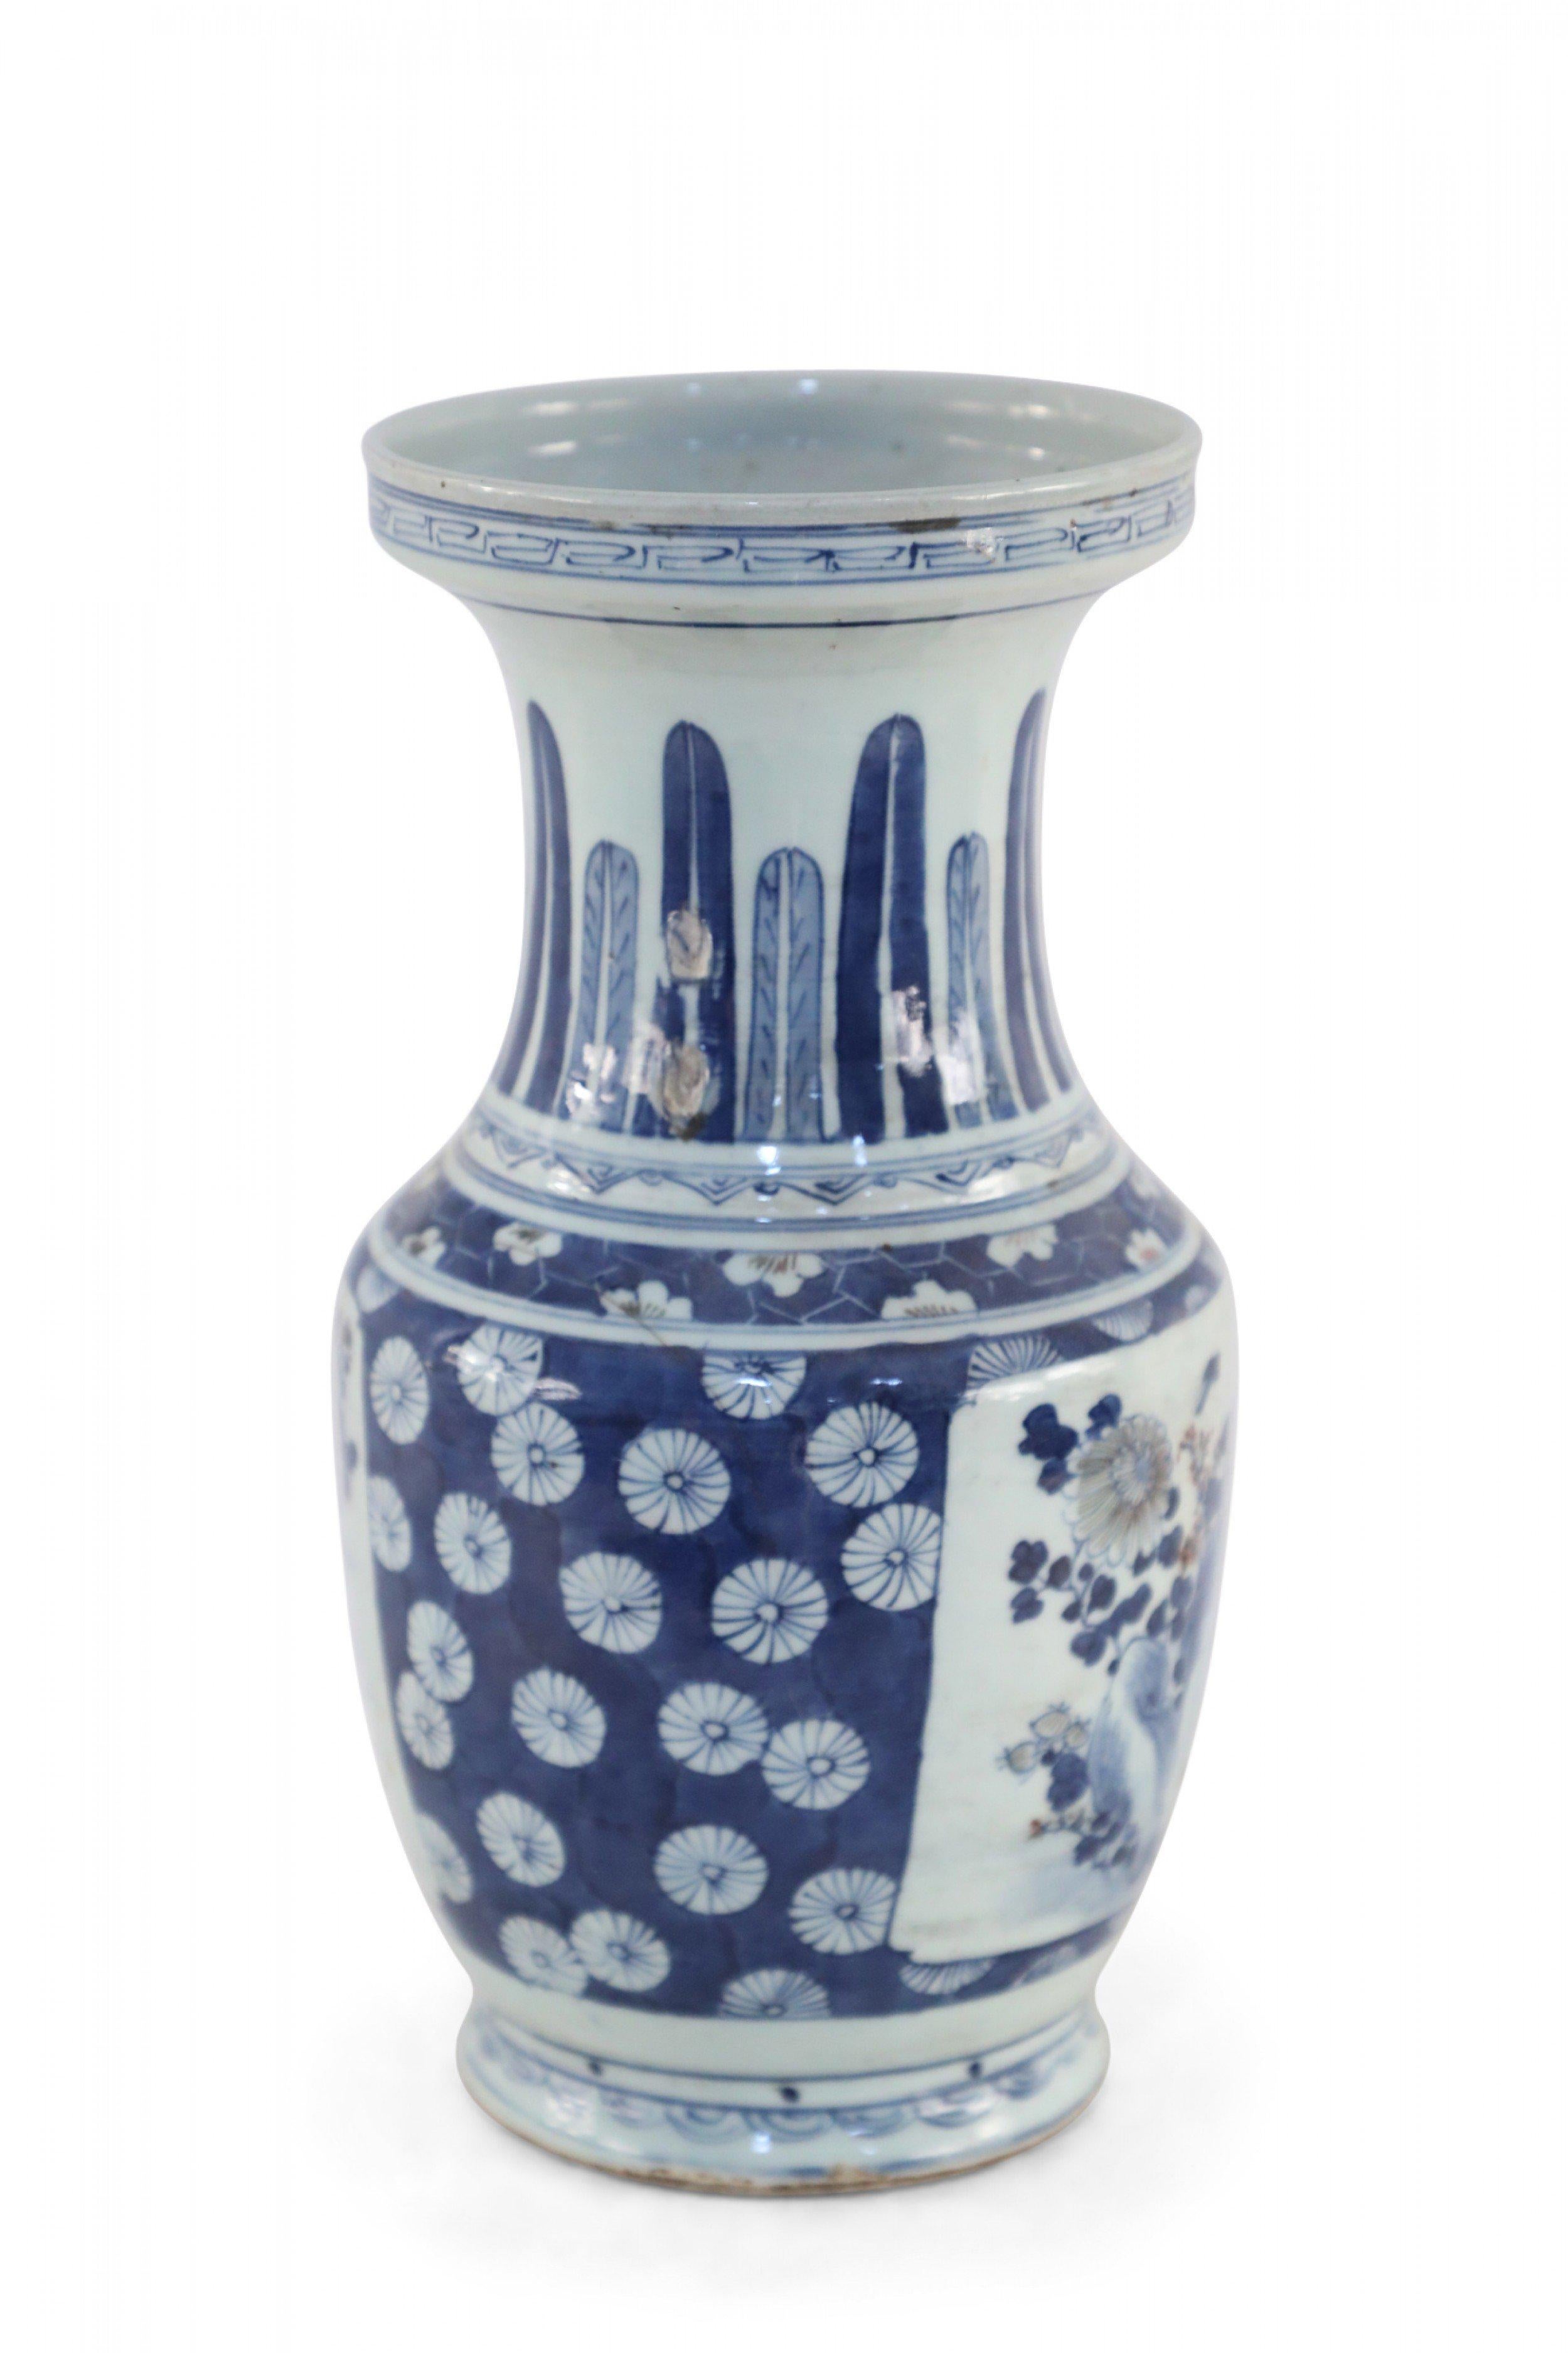 Chinese White and Blue Floral and Feather Motif Porcelain Urn For Sale 2